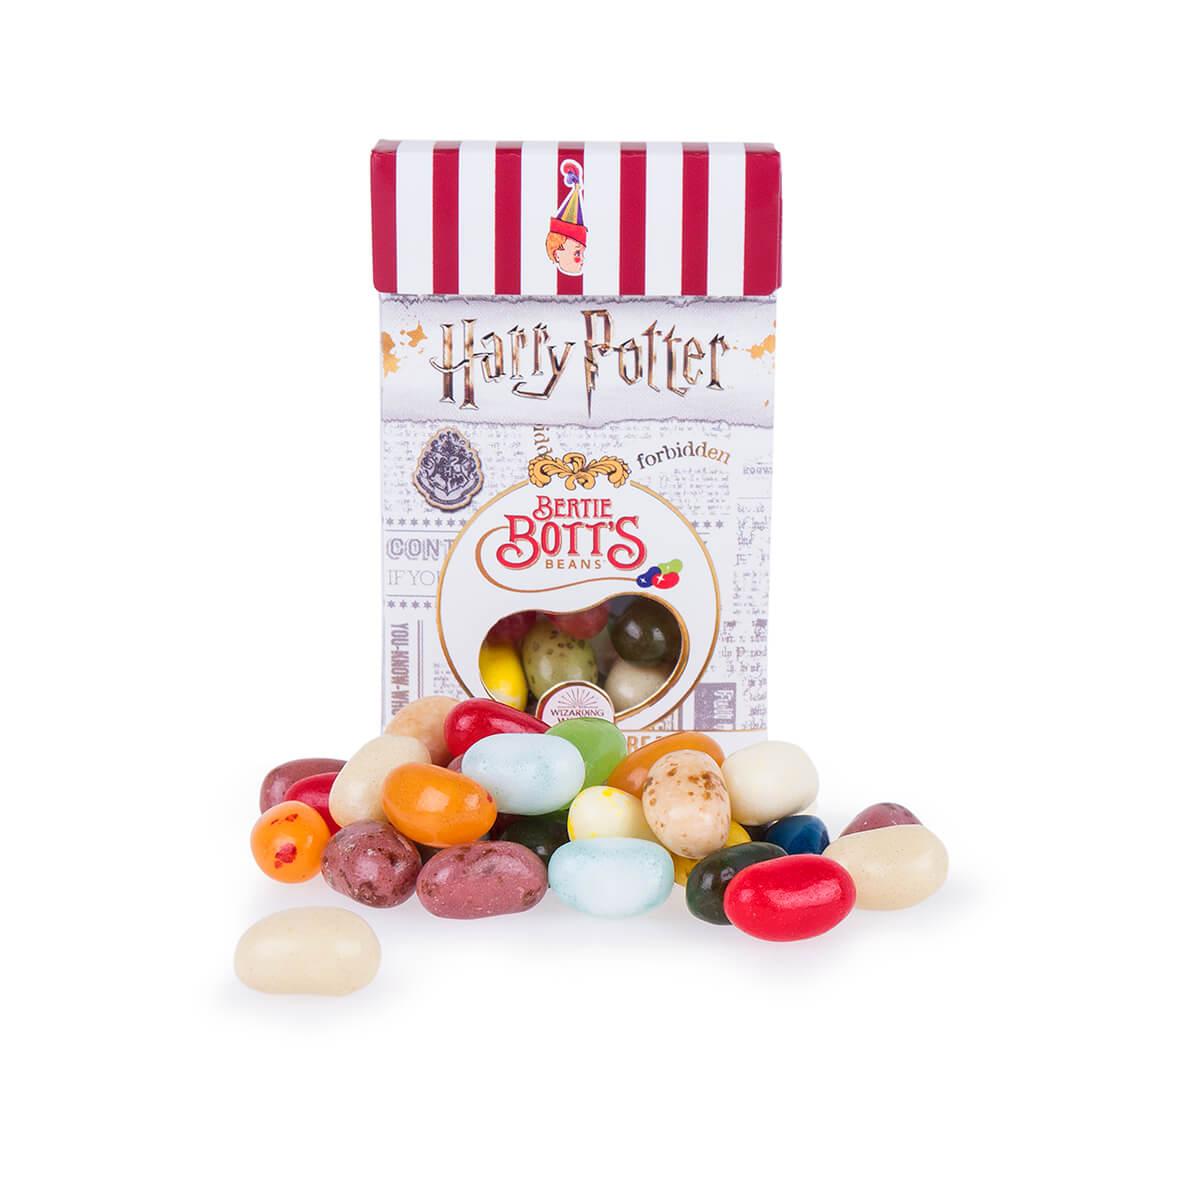 Jelly Belly Beans American Classics My American Shop